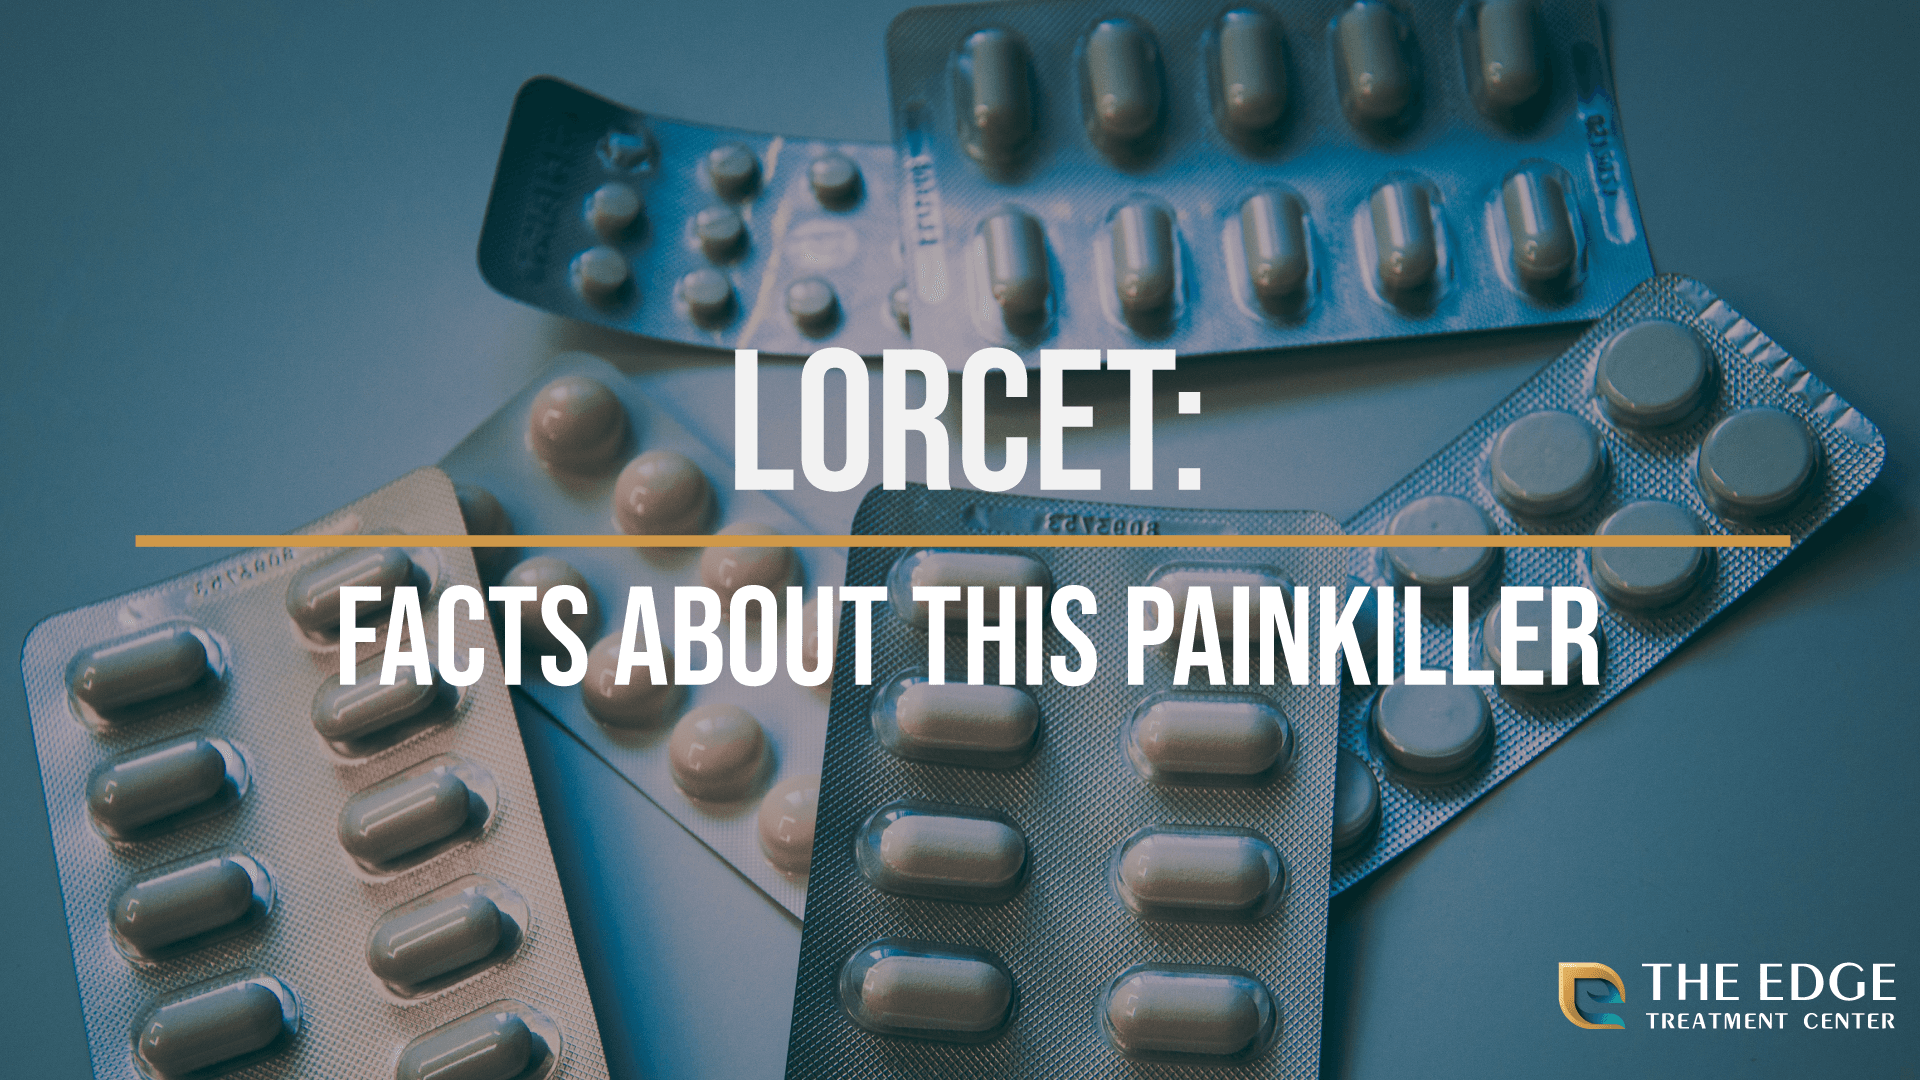 What is Lorcet?